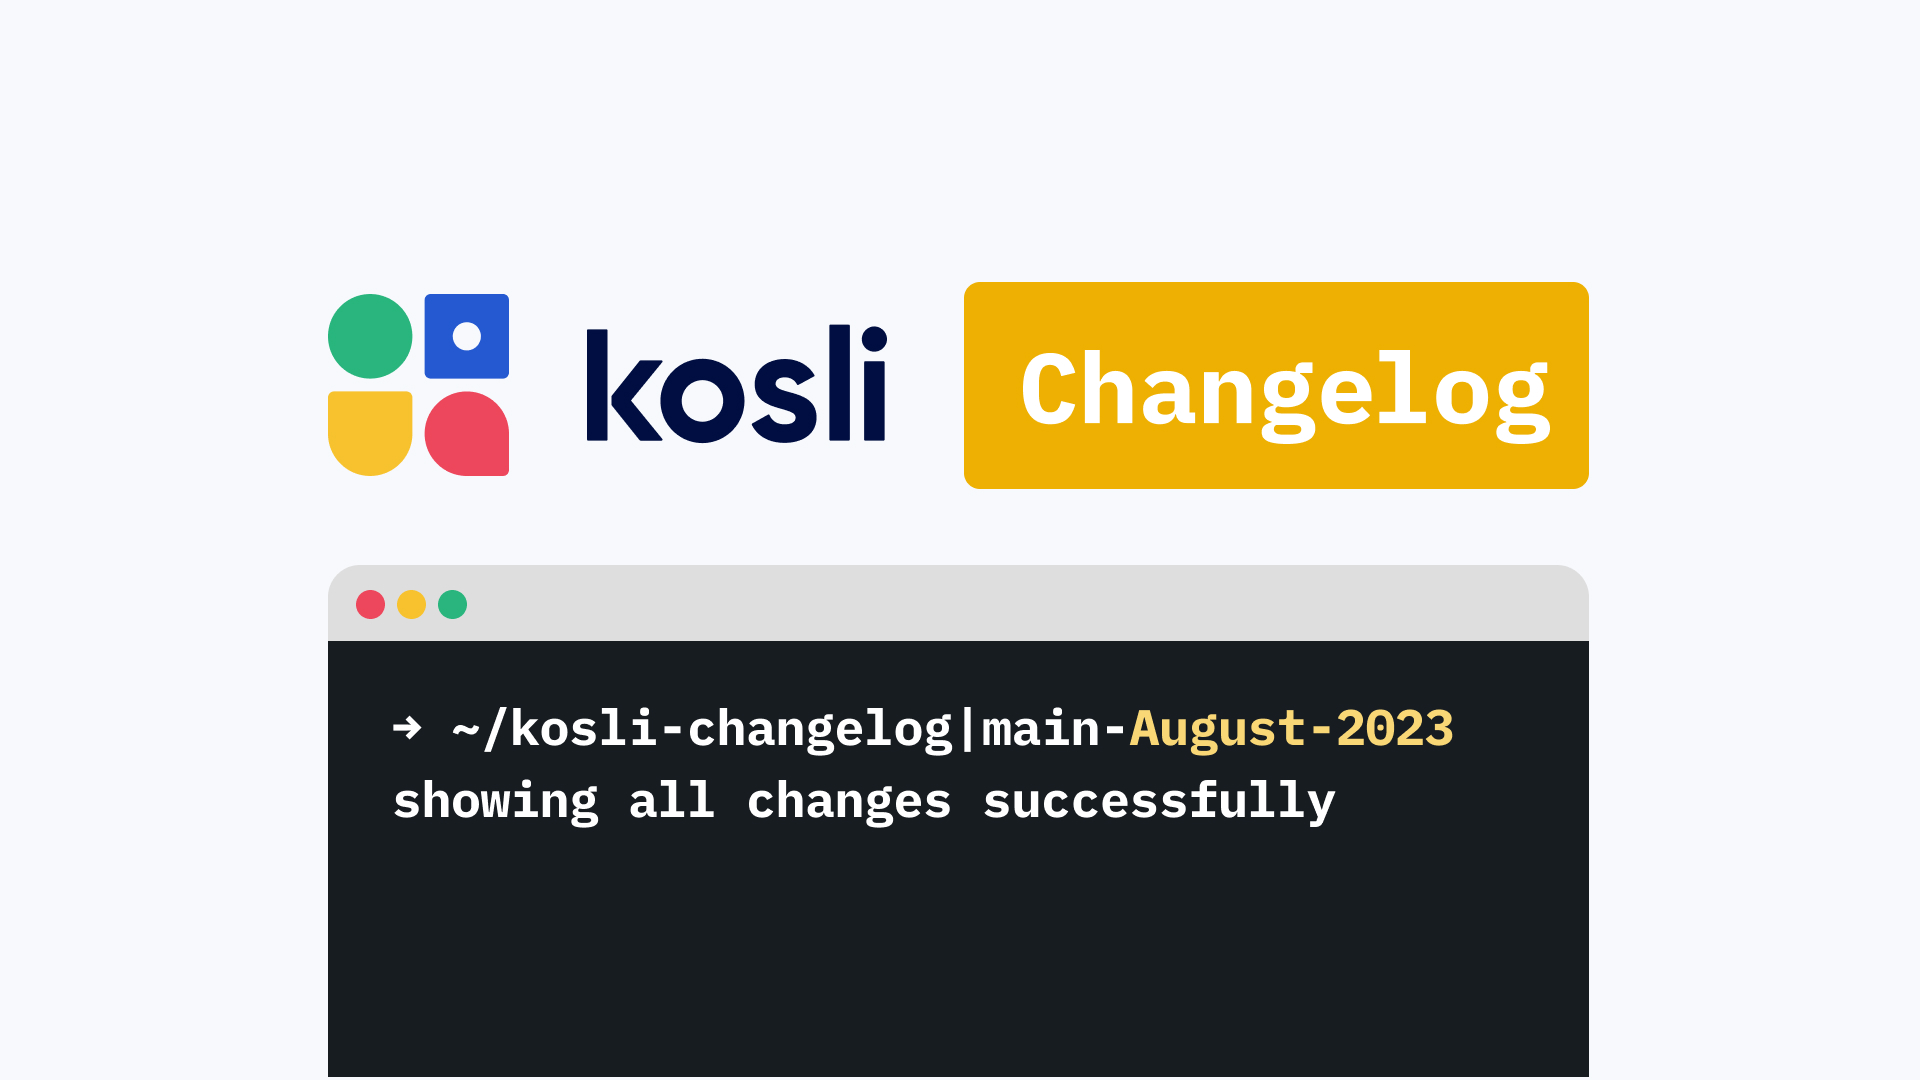 kosli changelog image that shows the kosli logo and a terminal like environment that says kosli-changelog-august 2023 showing all images successfully